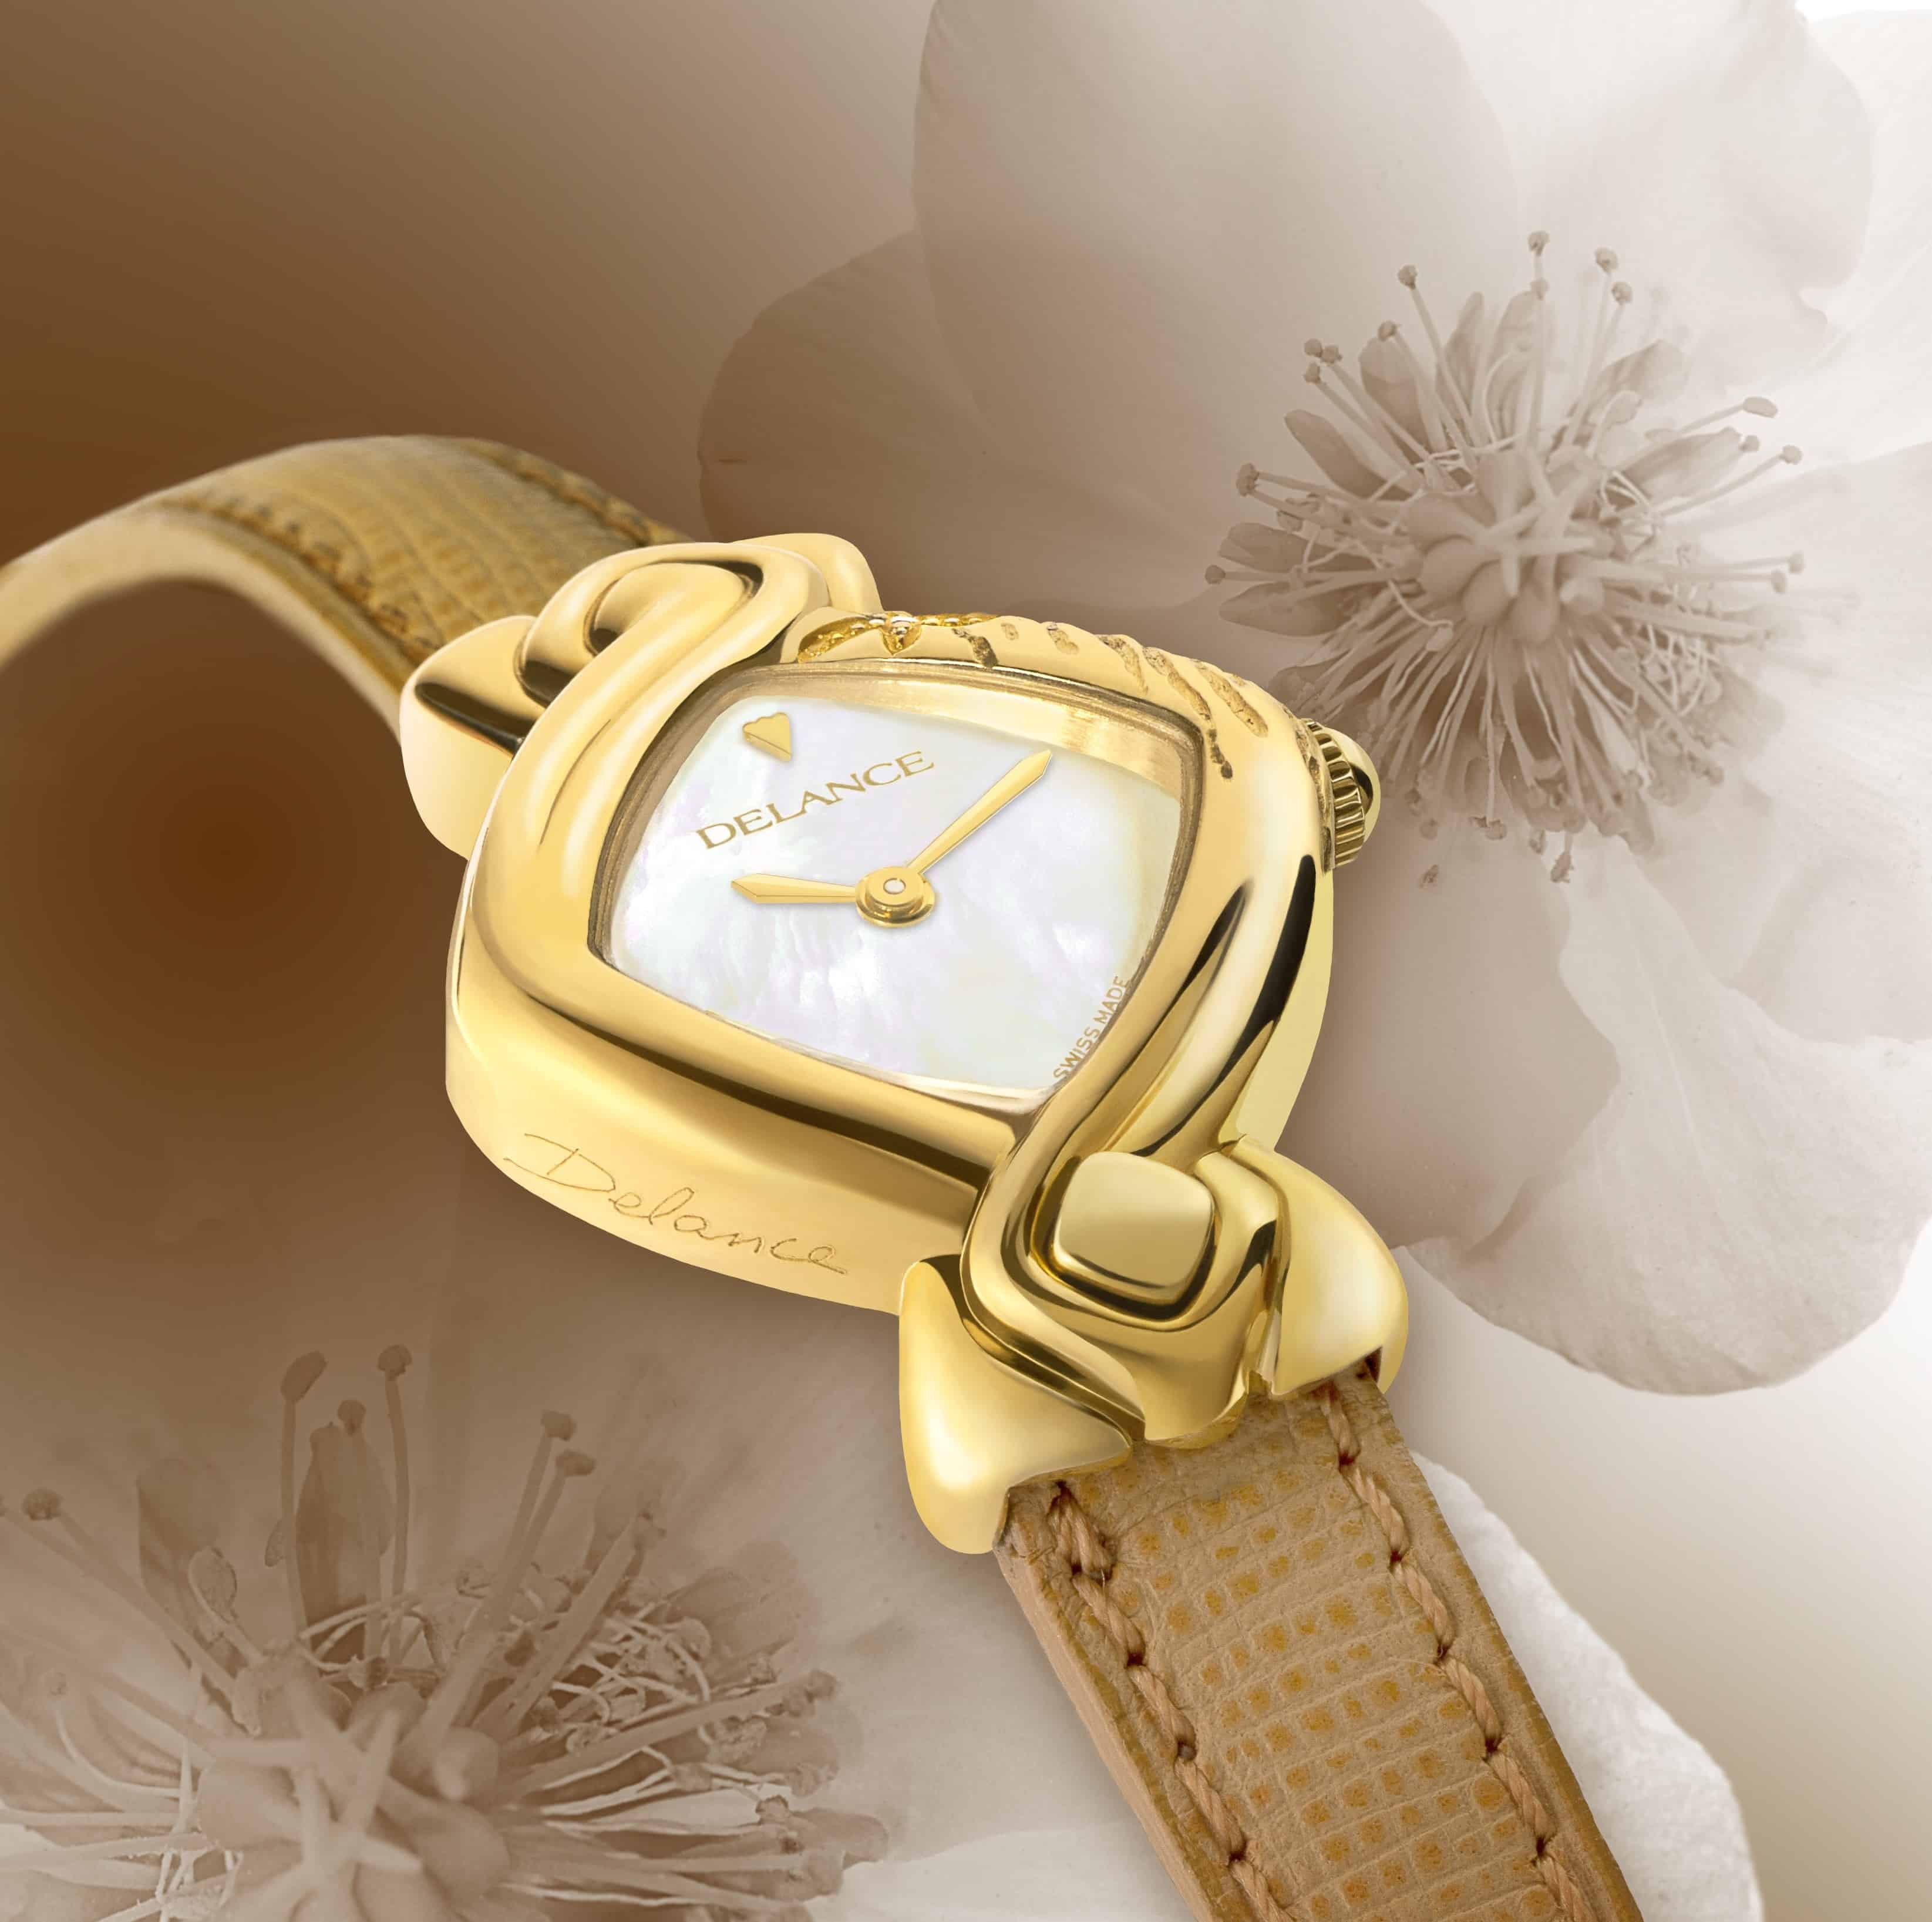 Personalized Delance watch for woman - Ocean collection